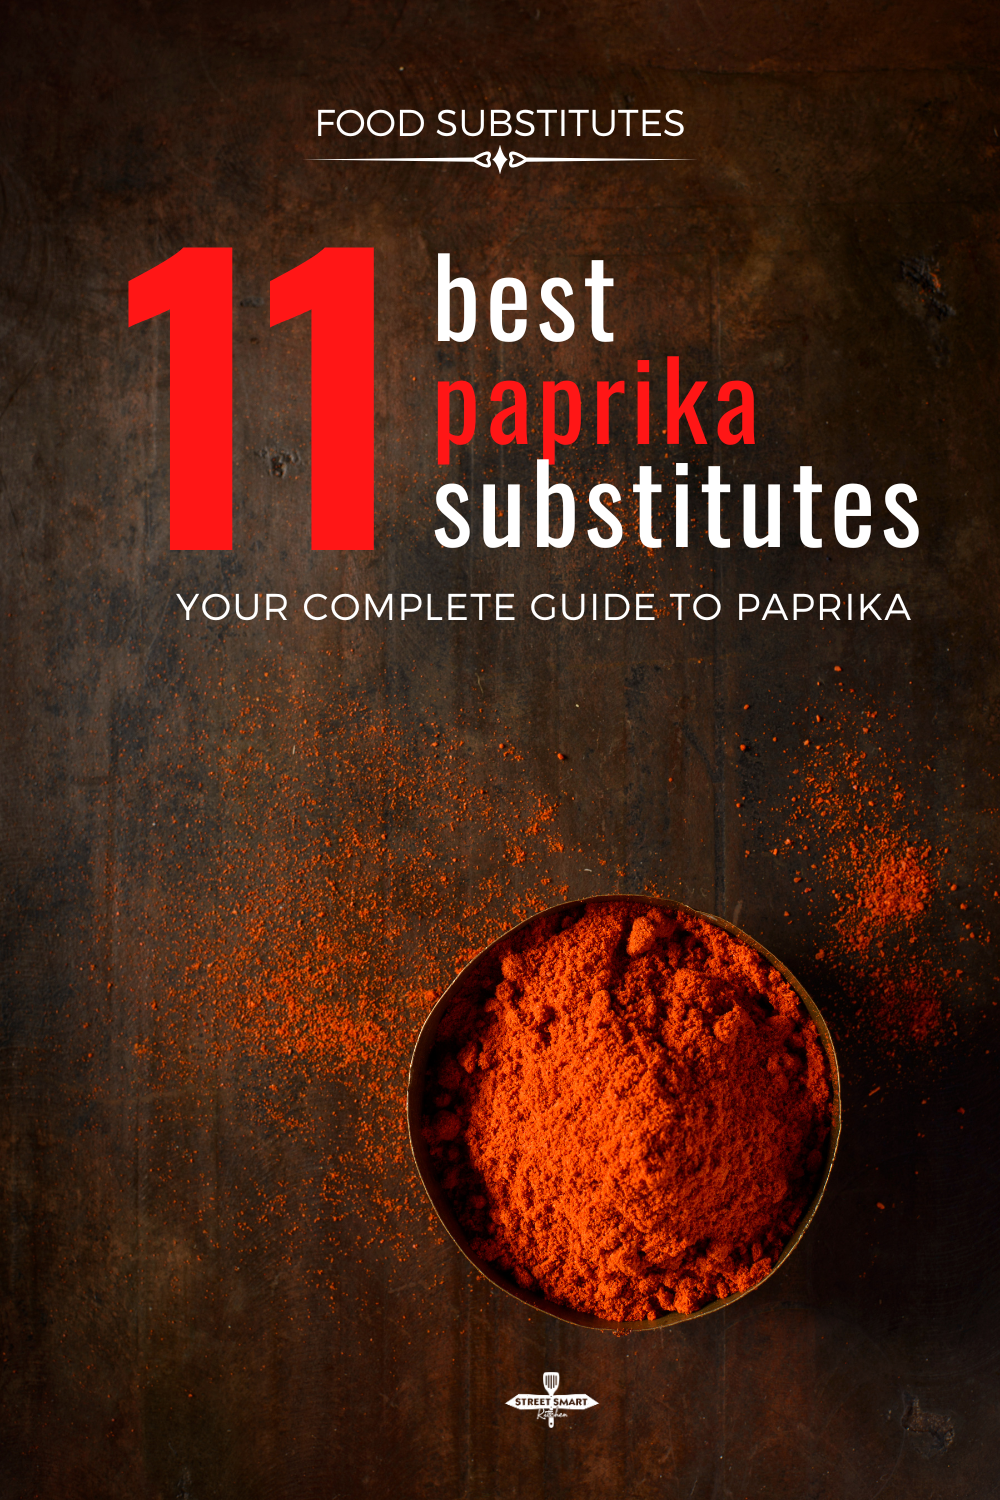 As a unique and robust spice with over 12 varieties, learn which paprika substitute will work best for your recipes.